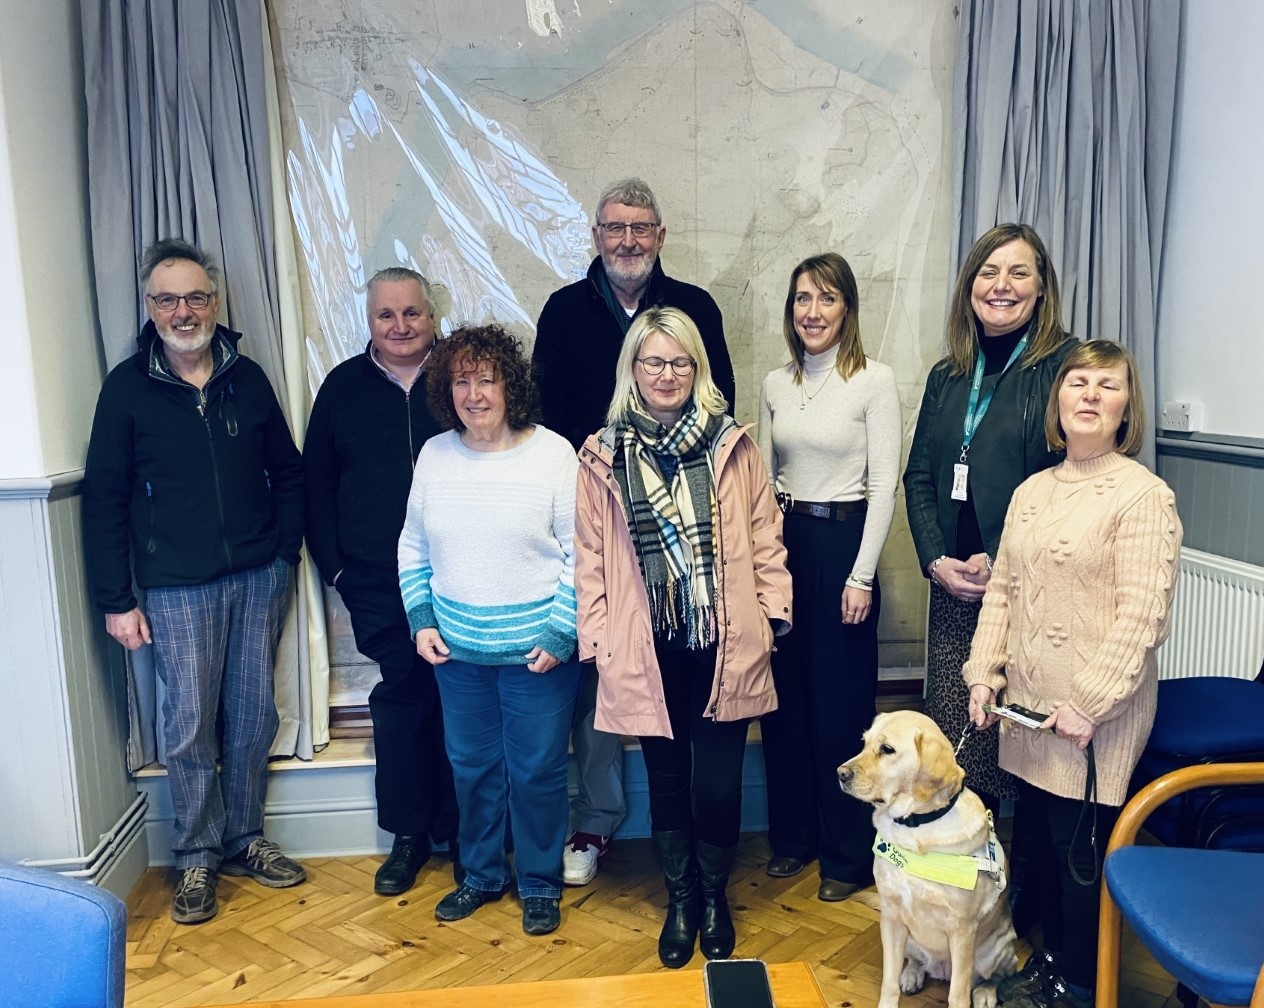 From left to right: Gordon Craig, Berkeley Ward Councillor, Alun Davies, EM for Gloucestershire SLC, Liz Ashton, Berkeley Town Councillor, Paul Turner, Berkeley Town Councillor, Justine Hopkins, Berkeley Town Clerk, Hannah Emery, SDC Corporate Policy and Governance Manager, Liz Shellam, SDC Community Access and Engagement Manager, and Julie Stephens, SLC member, and guide dog Heidi.